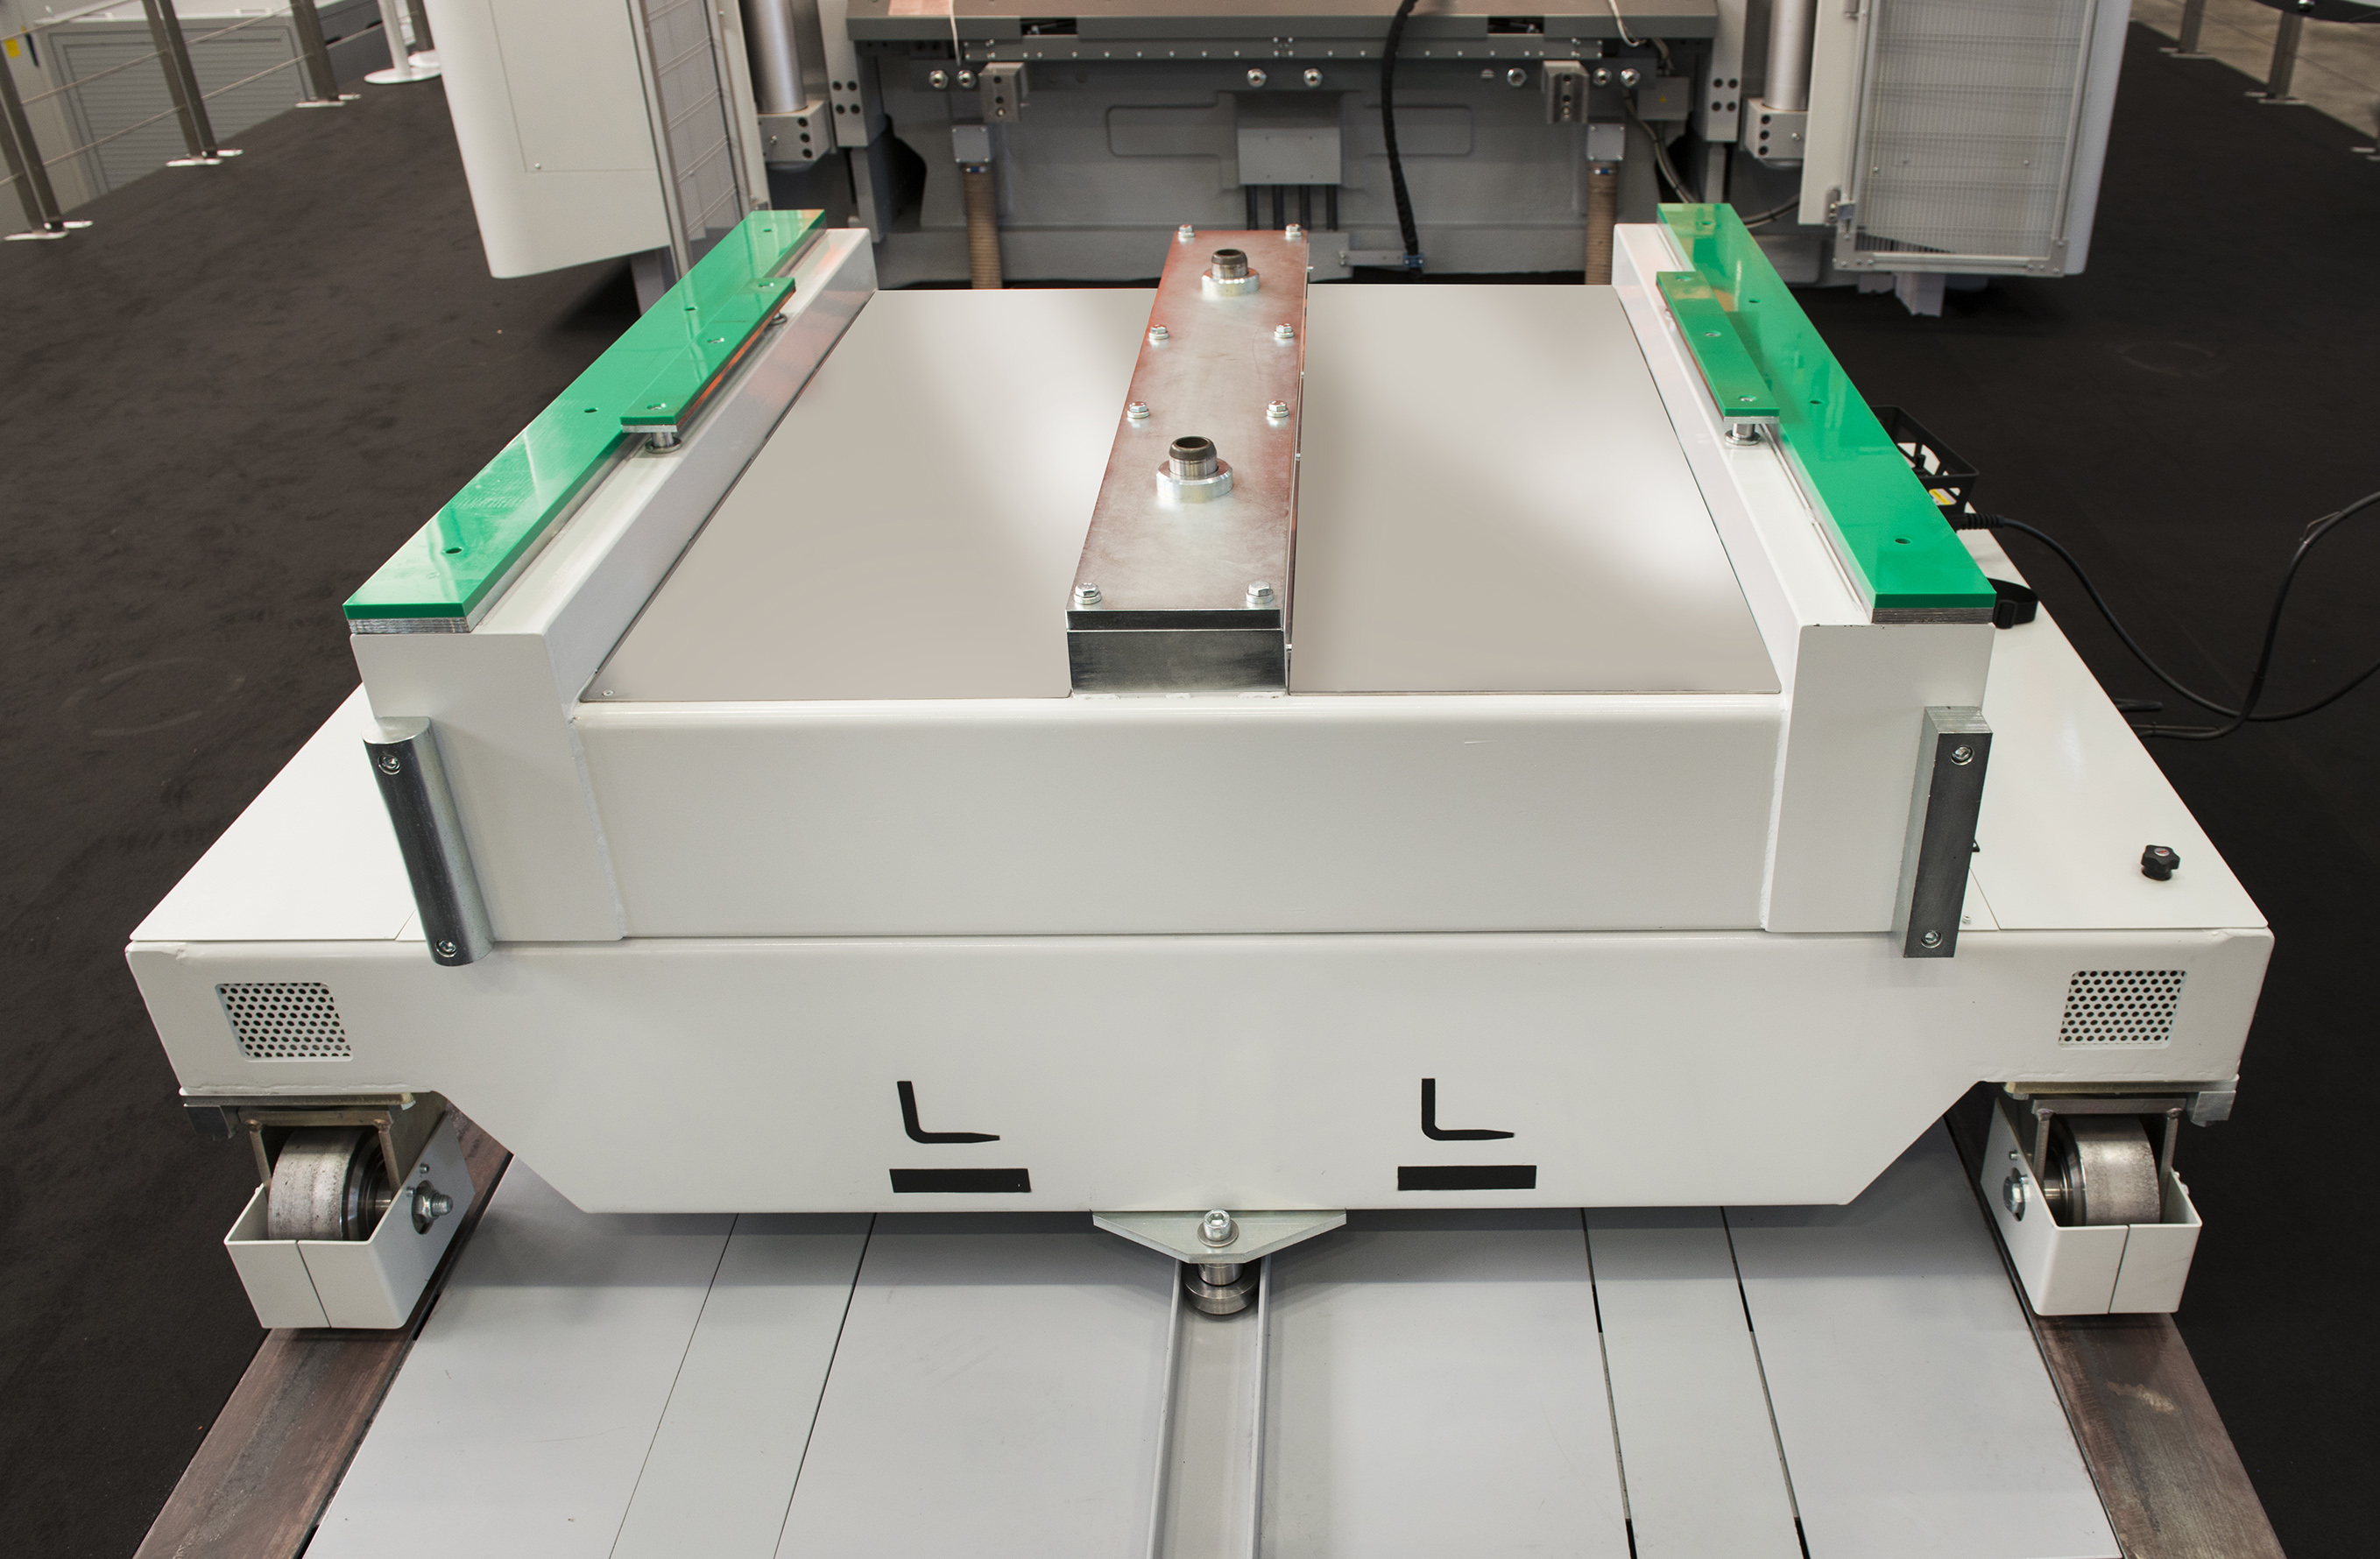 Sacmi CRS (Fast Mould Changeover), a global standard for high tonnage presses